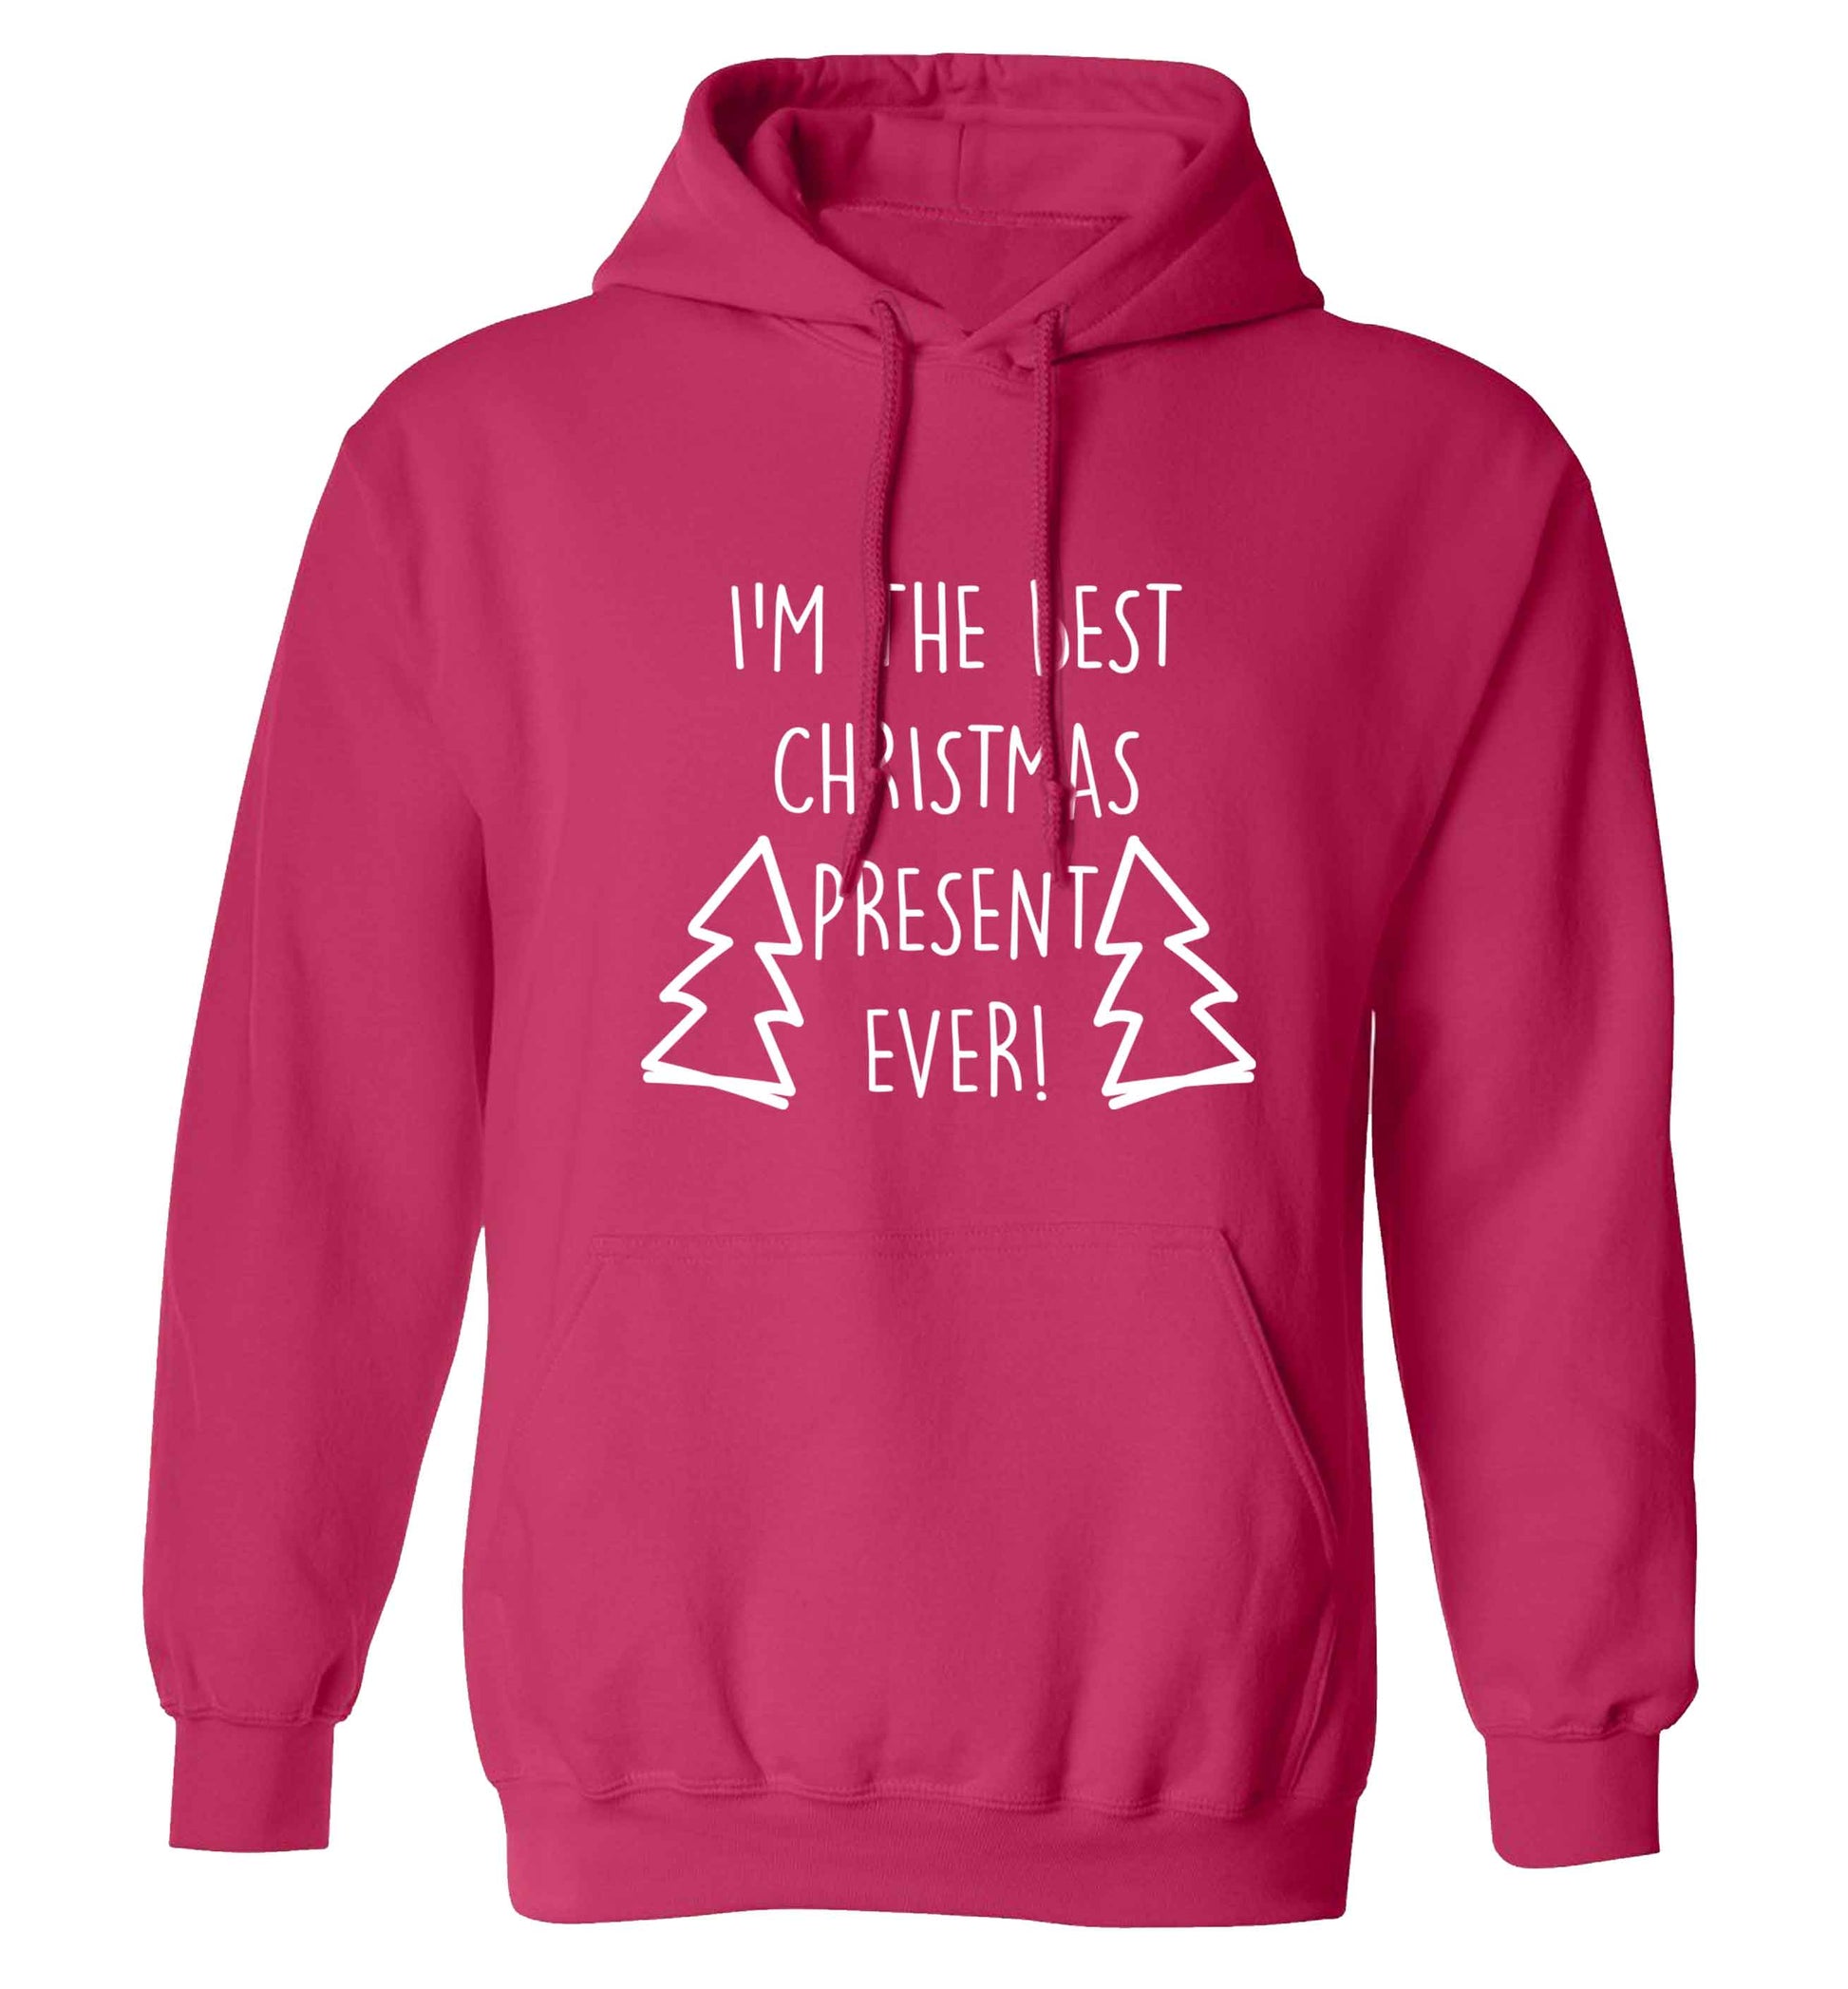 I'm the best Christmas present ever adults unisex pink hoodie 2XL